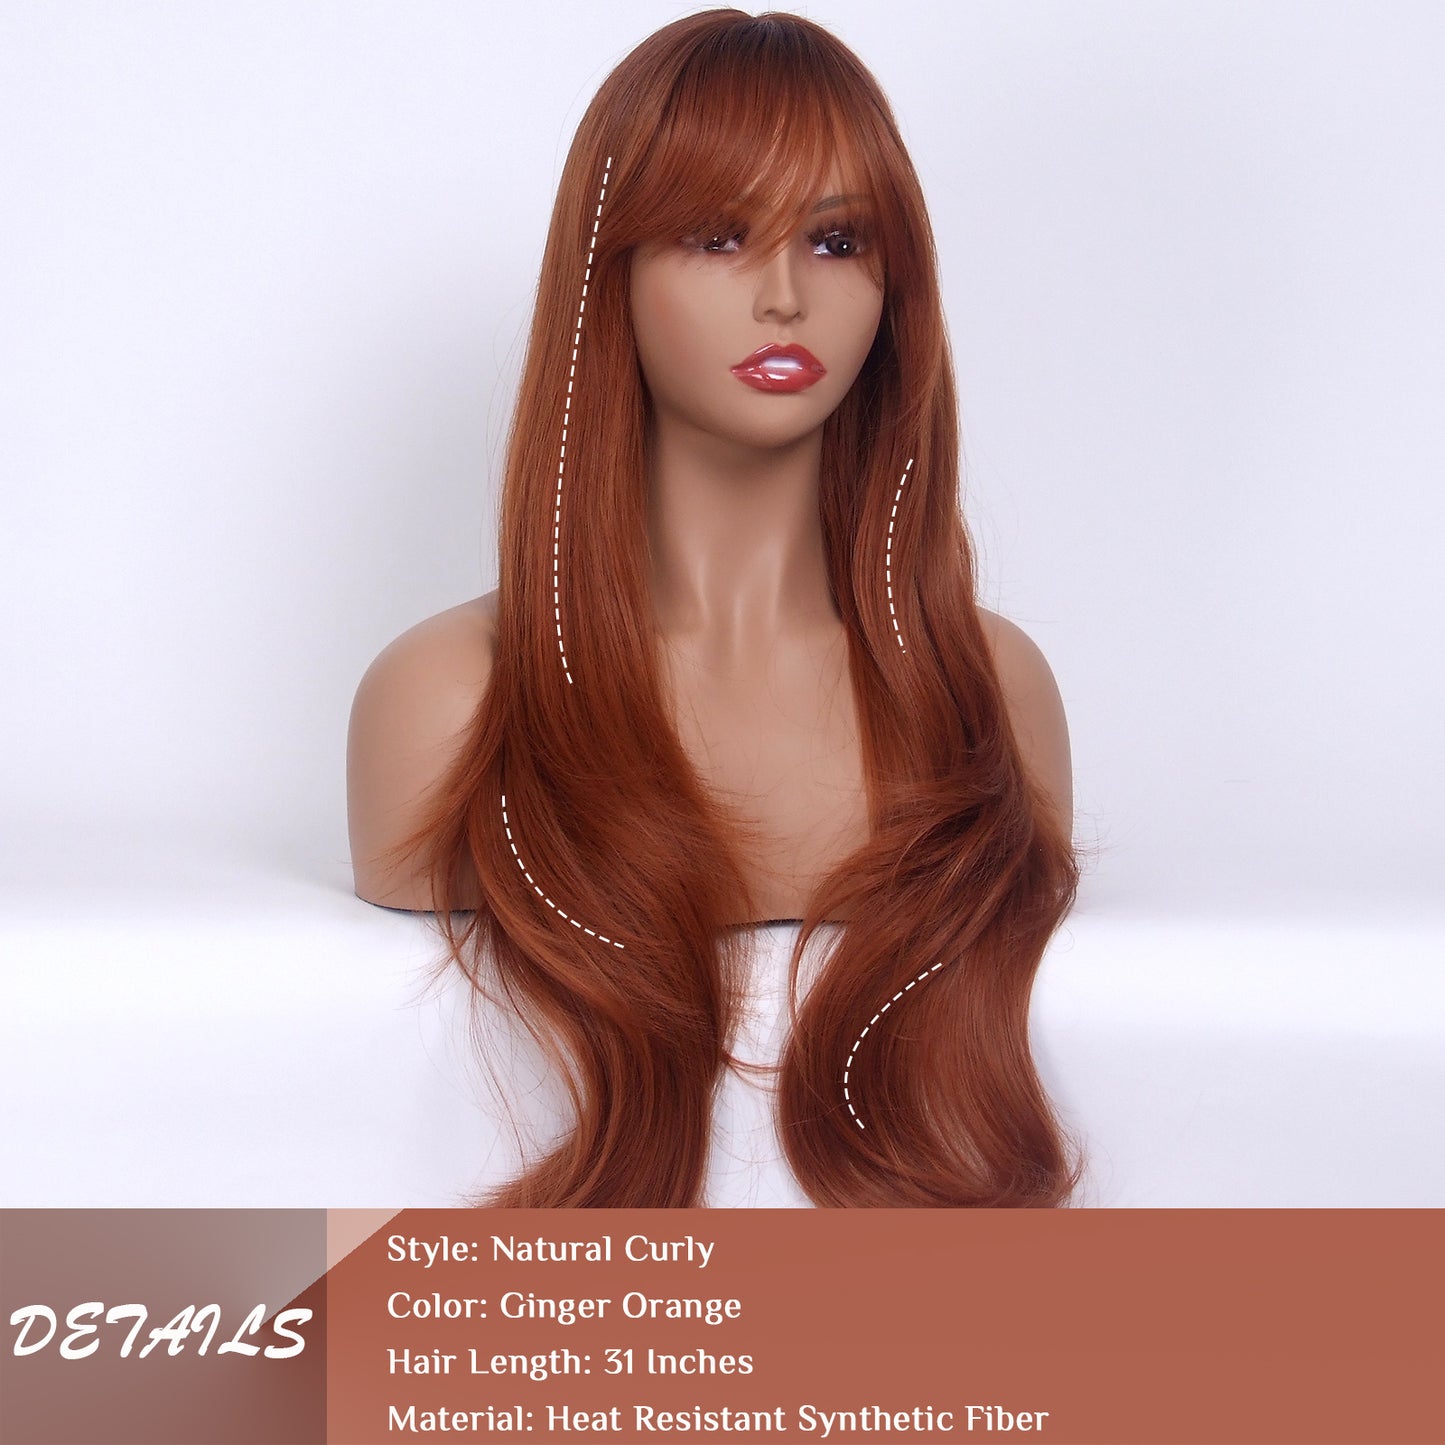 LINGDORA Long Ginger Orange Wavy Wig with Bangs for Women Natural Curly Hair Synthetic Silky